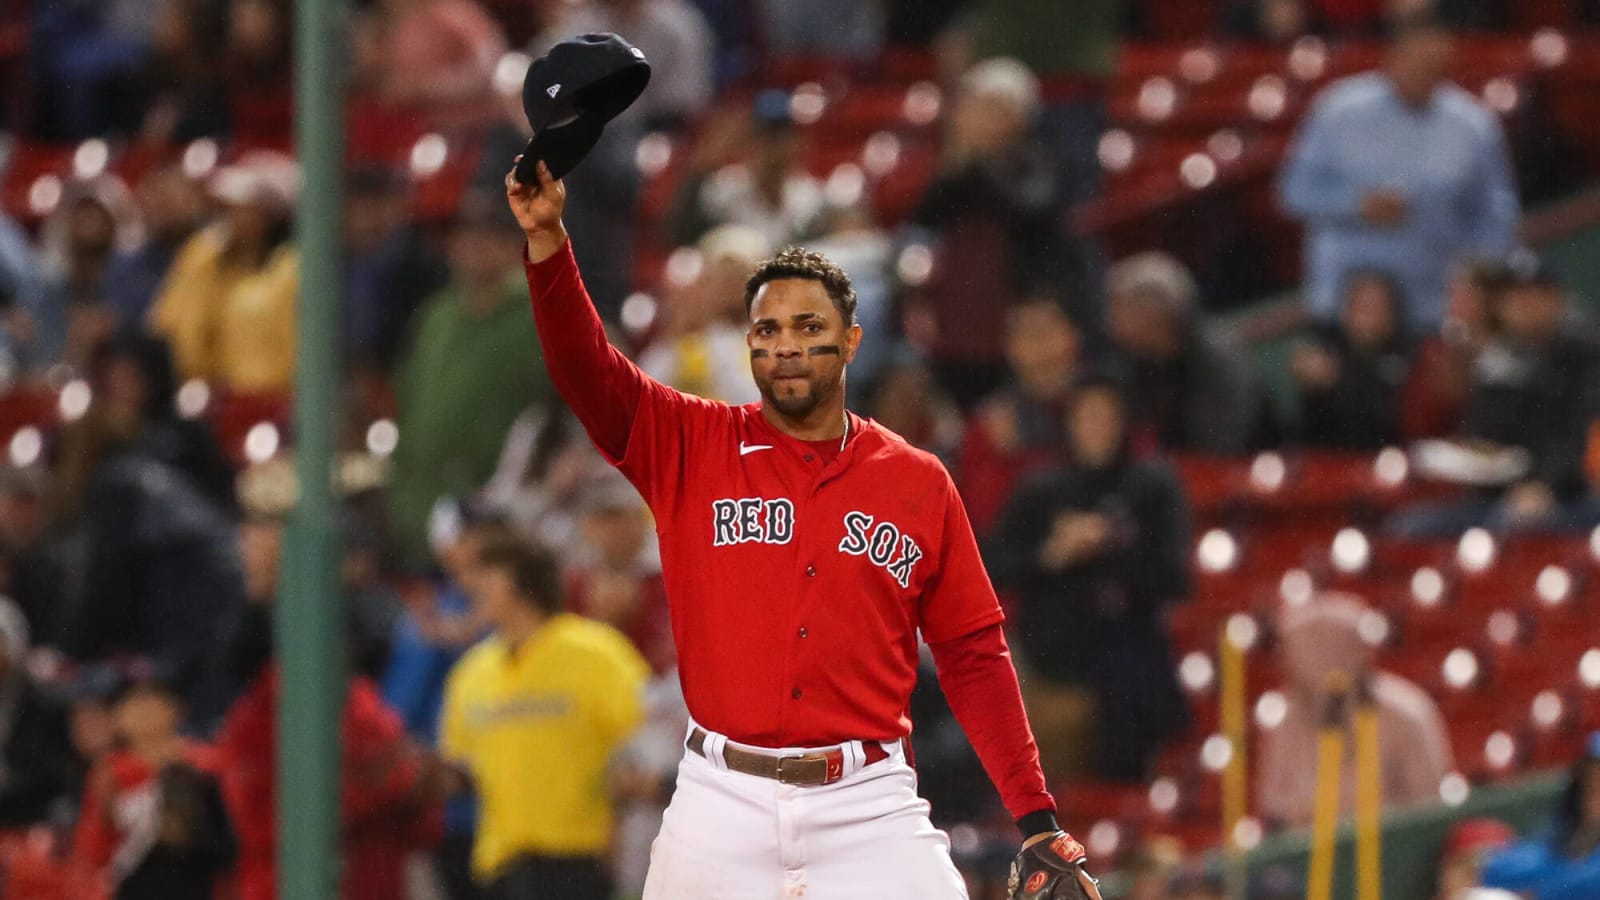 Red Sox haven't made 'competitive offer' to Xander Bogaerts